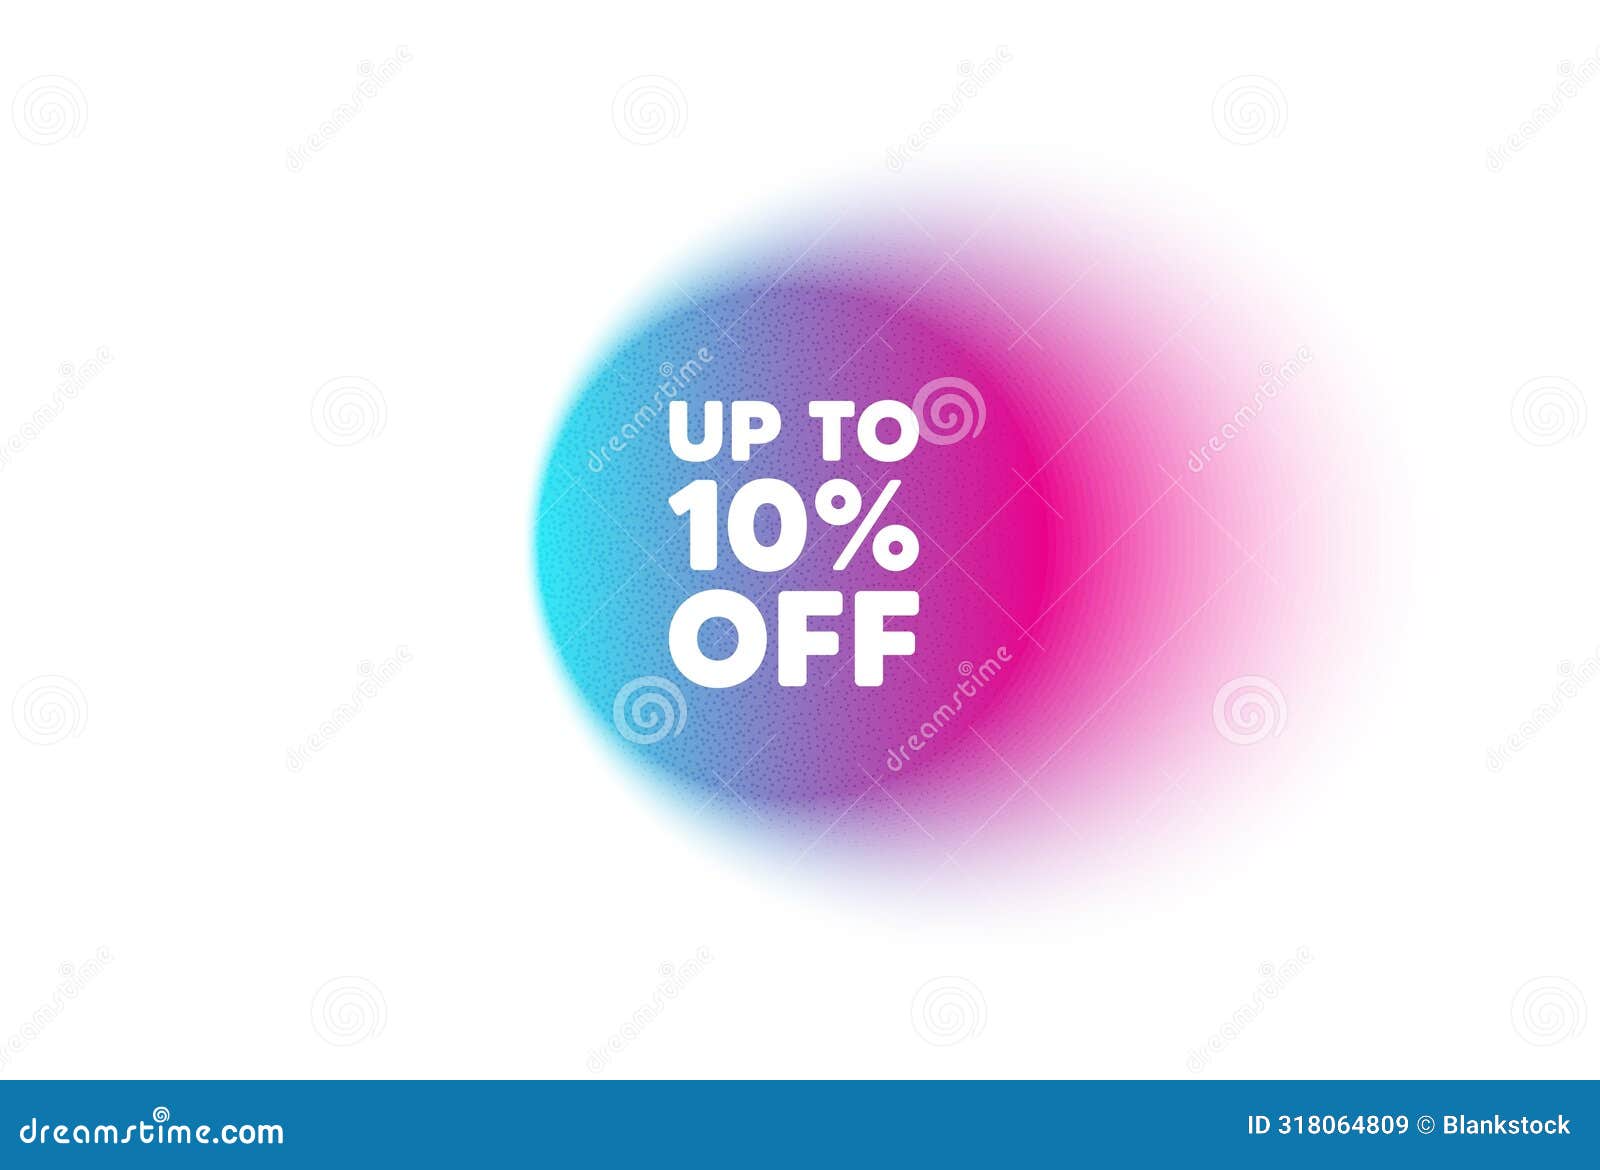 up to 10 percent off sale. discount offer price sign. color neon gradient circle banner. 